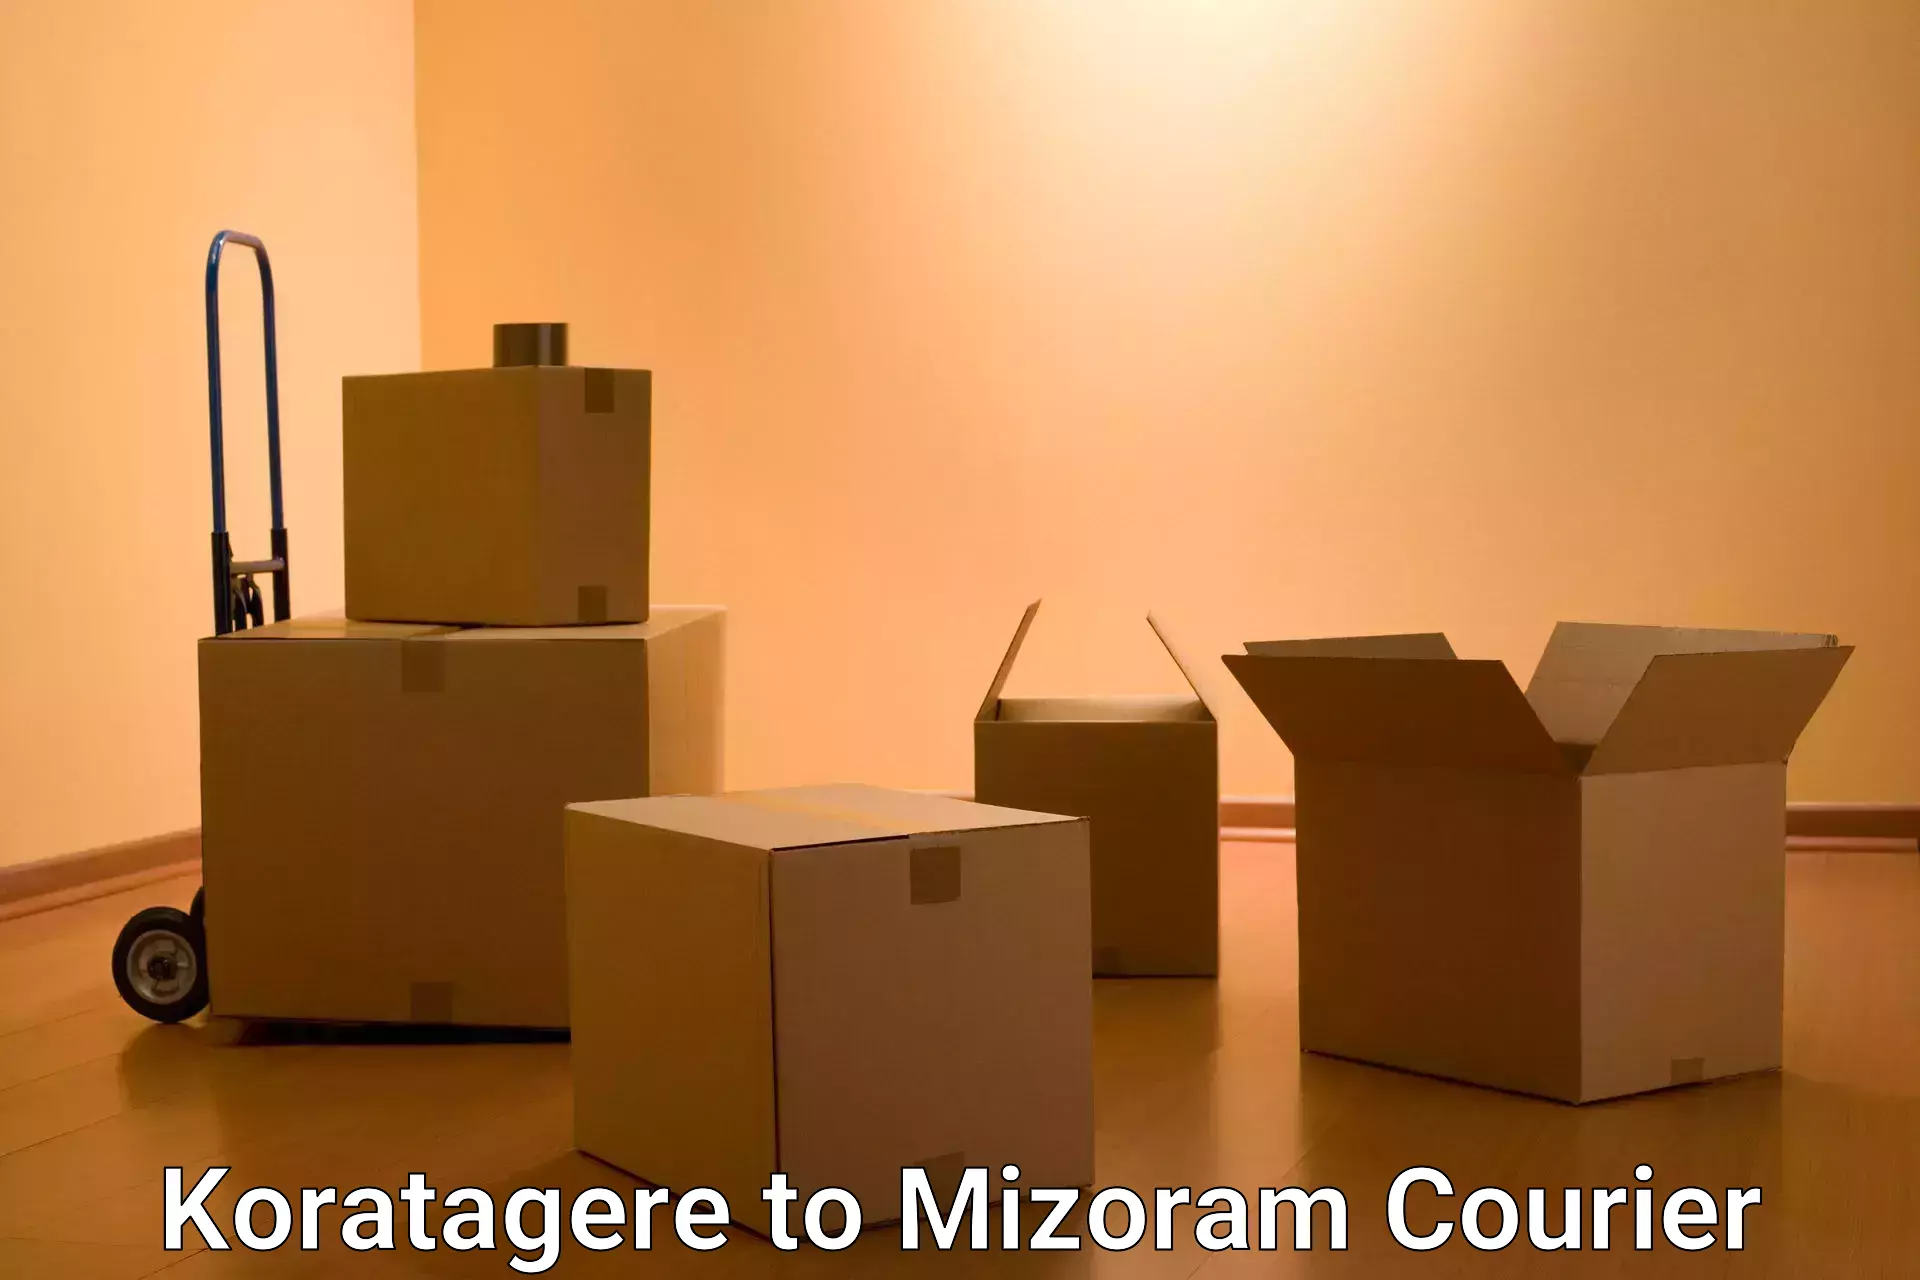 State-of-the-art courier technology Koratagere to Mizoram